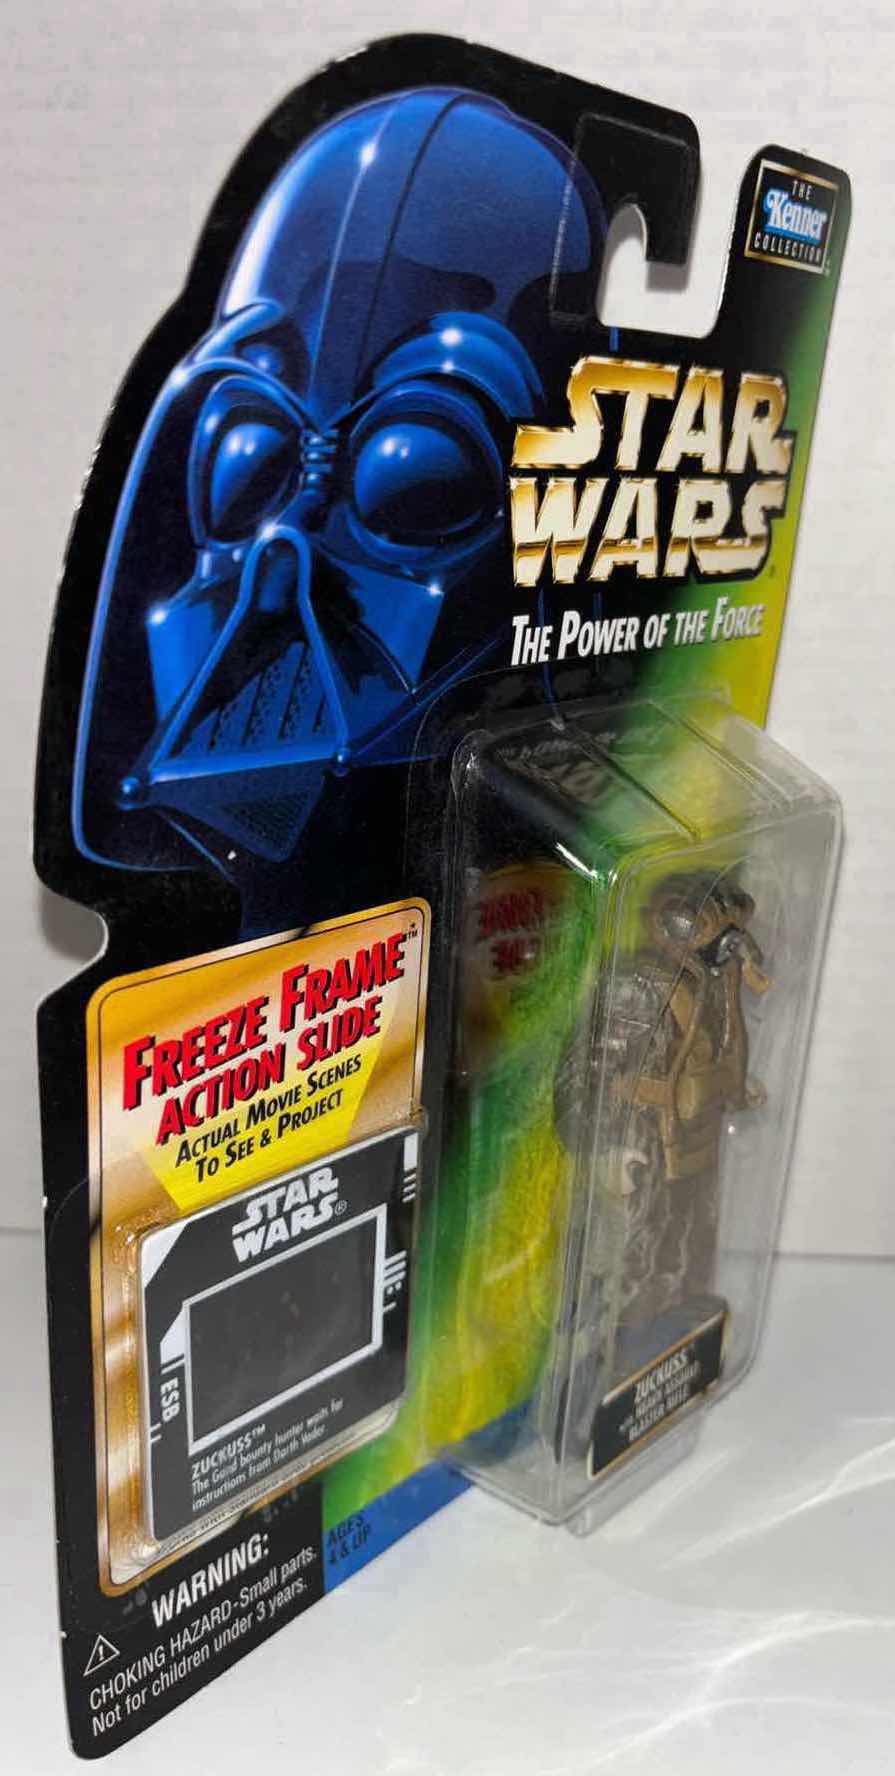 Photo 2 of NEW KENNER STAR WARS POWER OF THE FORCE ACTION FIGURE, ZUCKUSS W HEAVY ASSAULT BLASTER RIFLE & FREEZE FRAME ACTION SLIDE